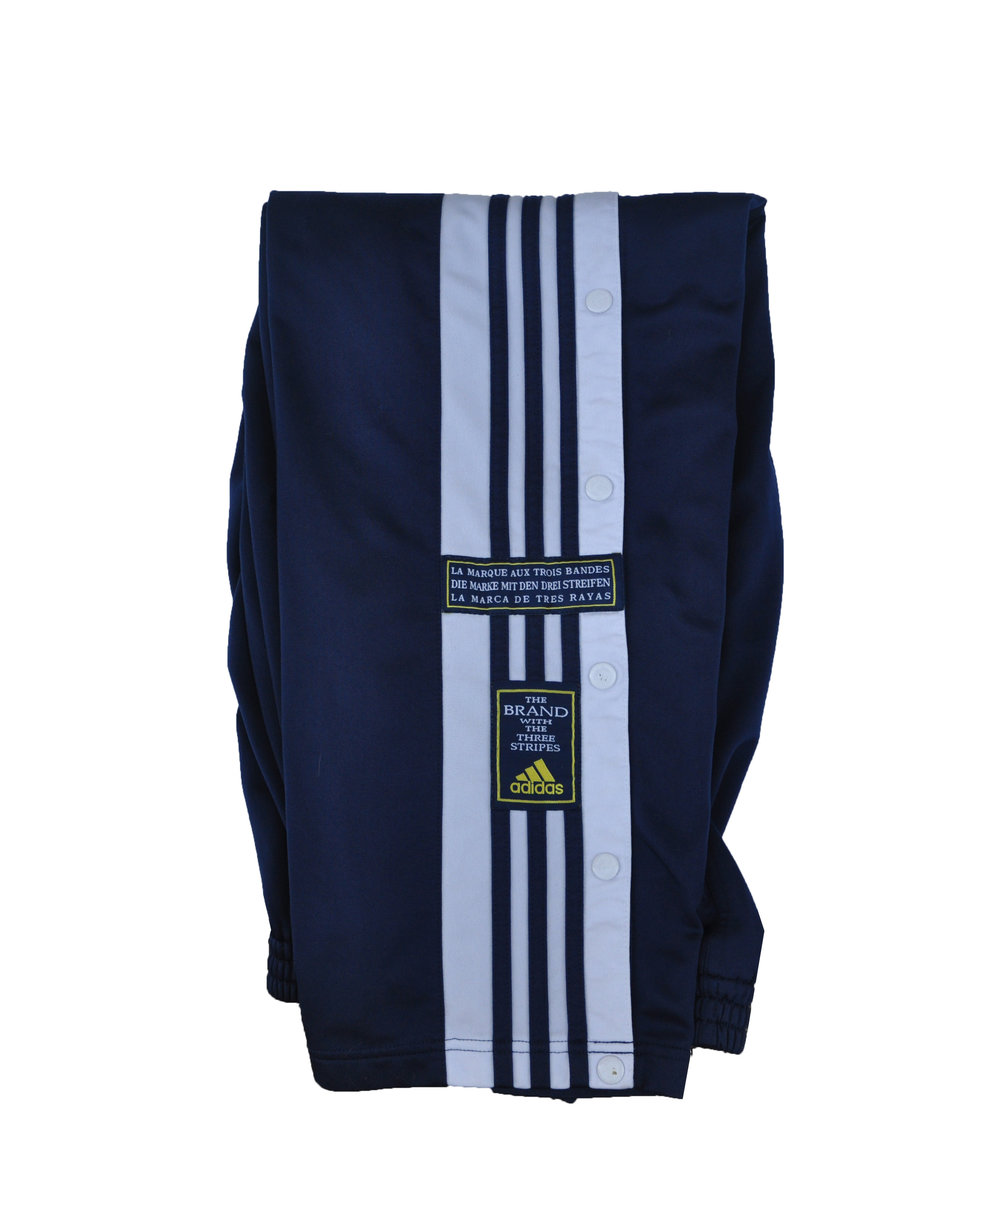 90’s Adidas Logo Embroidered Blue & White Striped Rip Away Pant